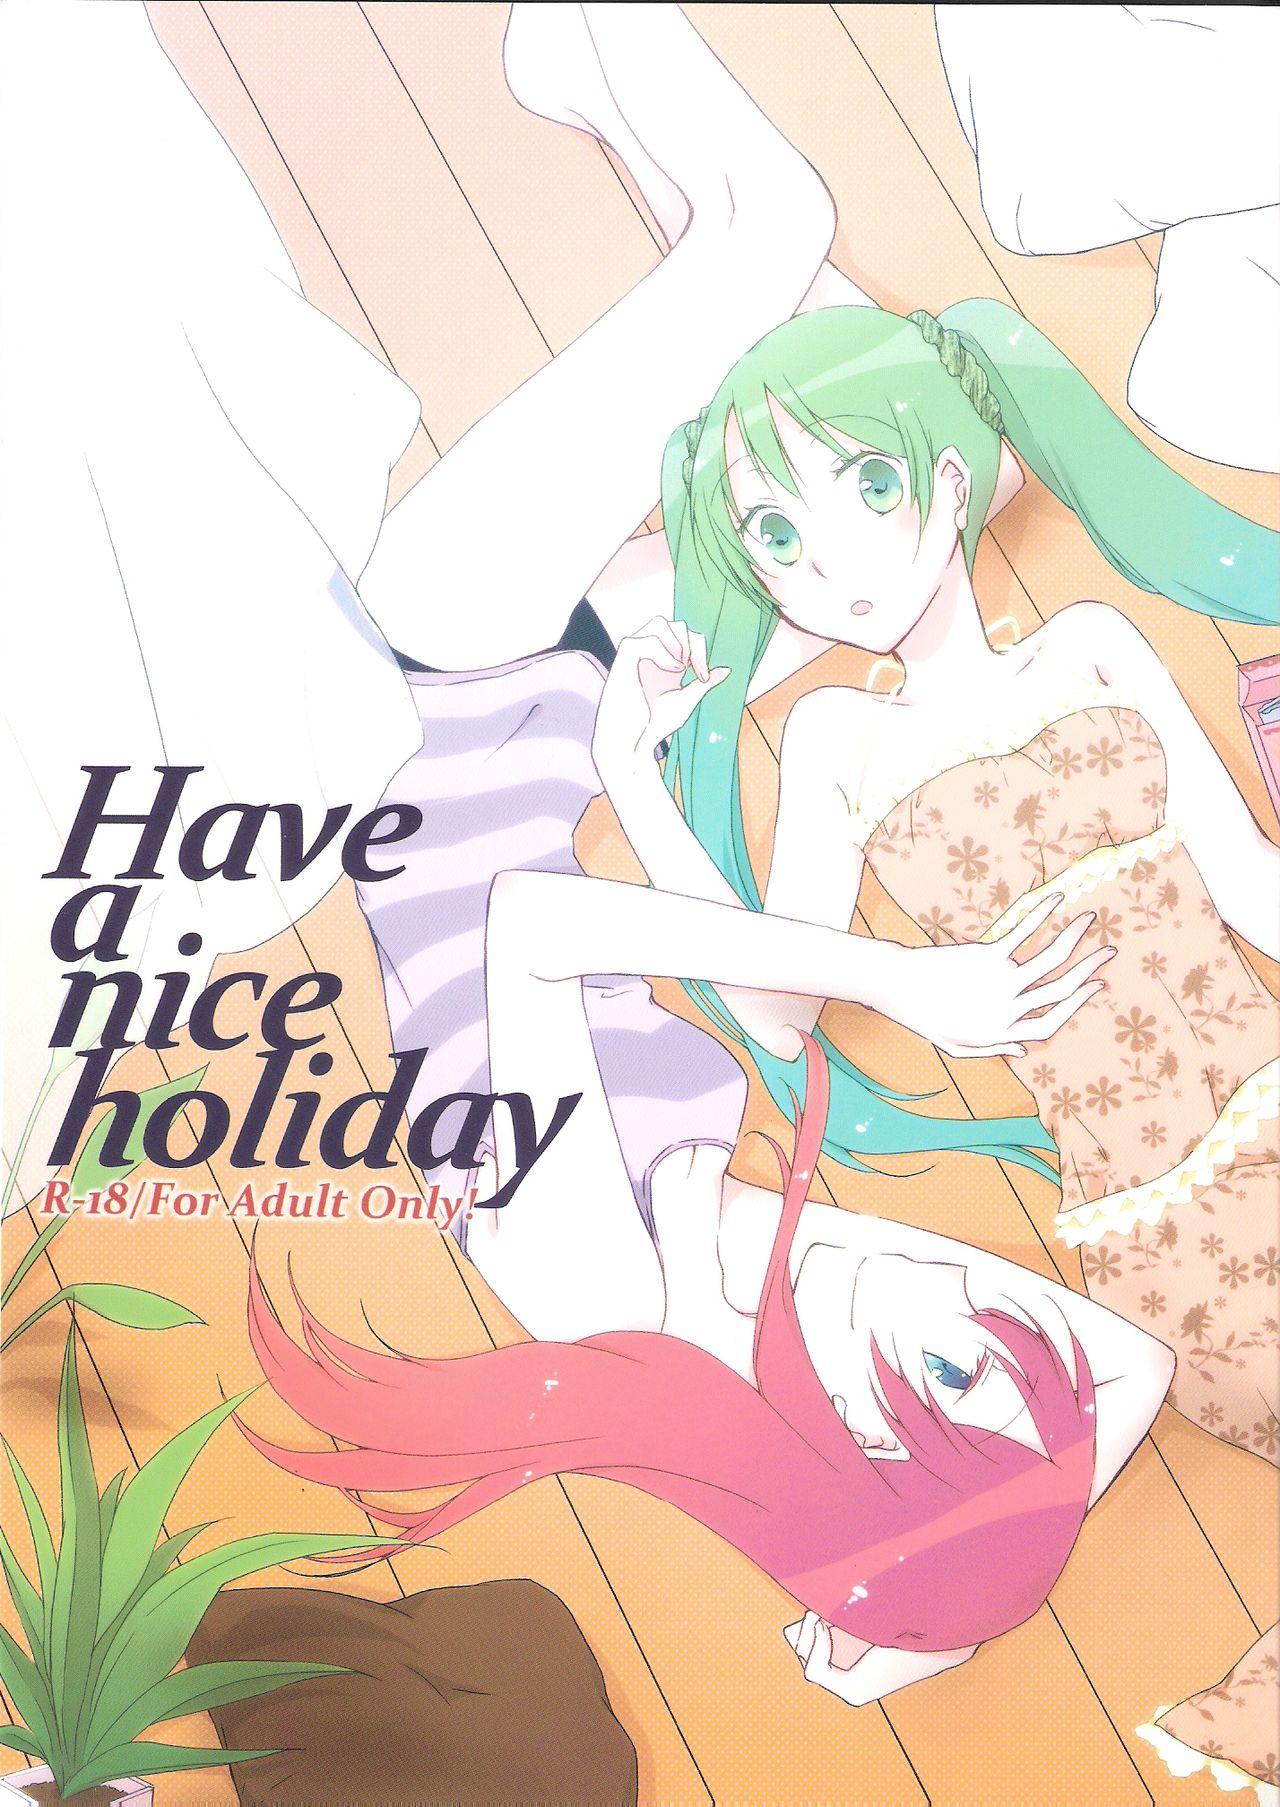 Bath Have a nice holiday - Vocaloid Blowjob - Page 2